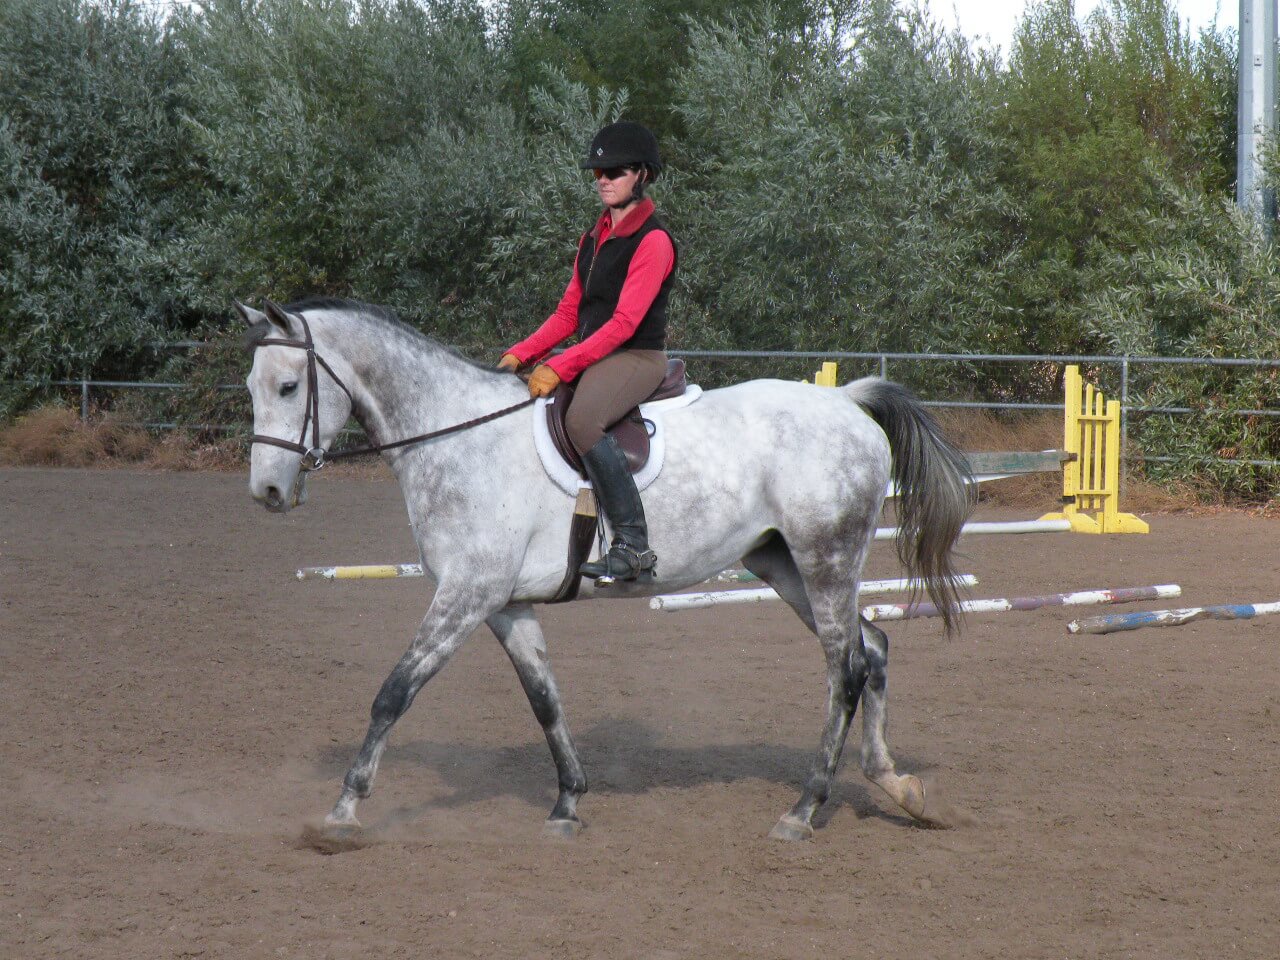 A person riding on the back of a white horse.